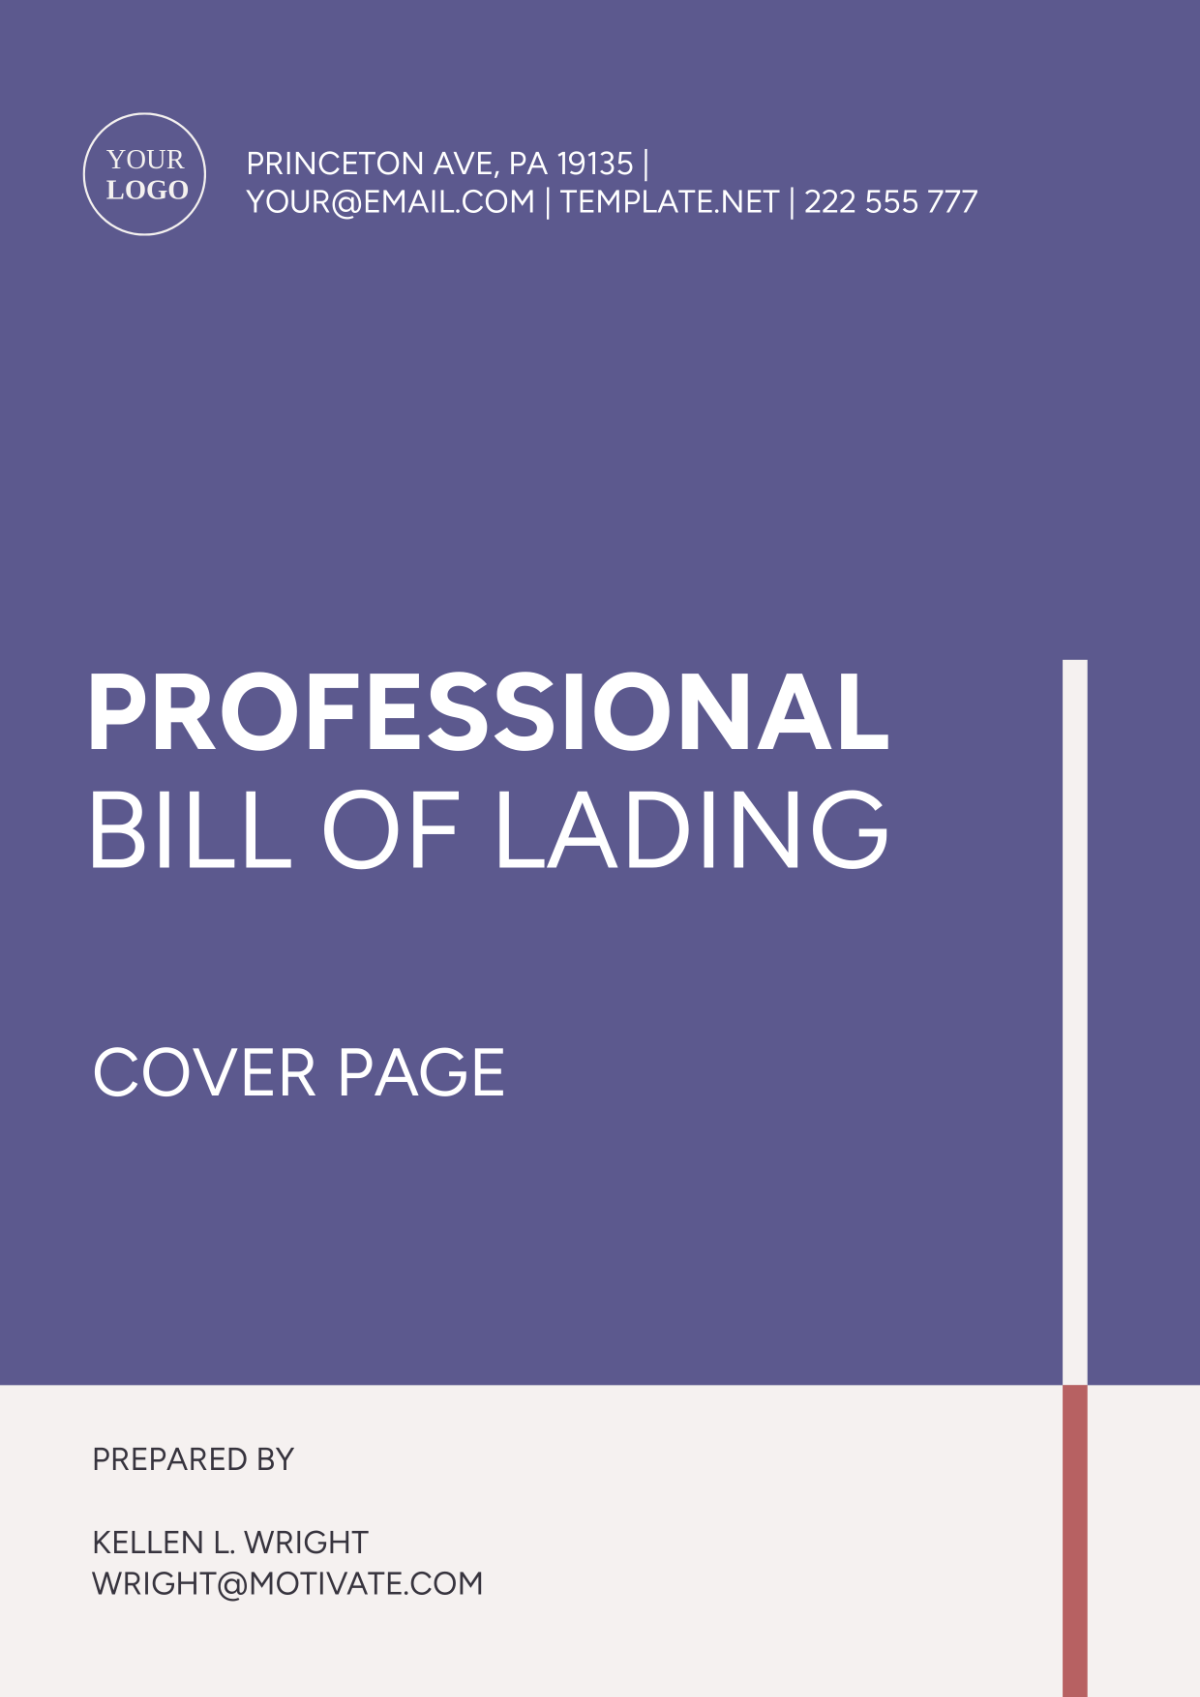 Professional Bill of Lading Cover Page Template